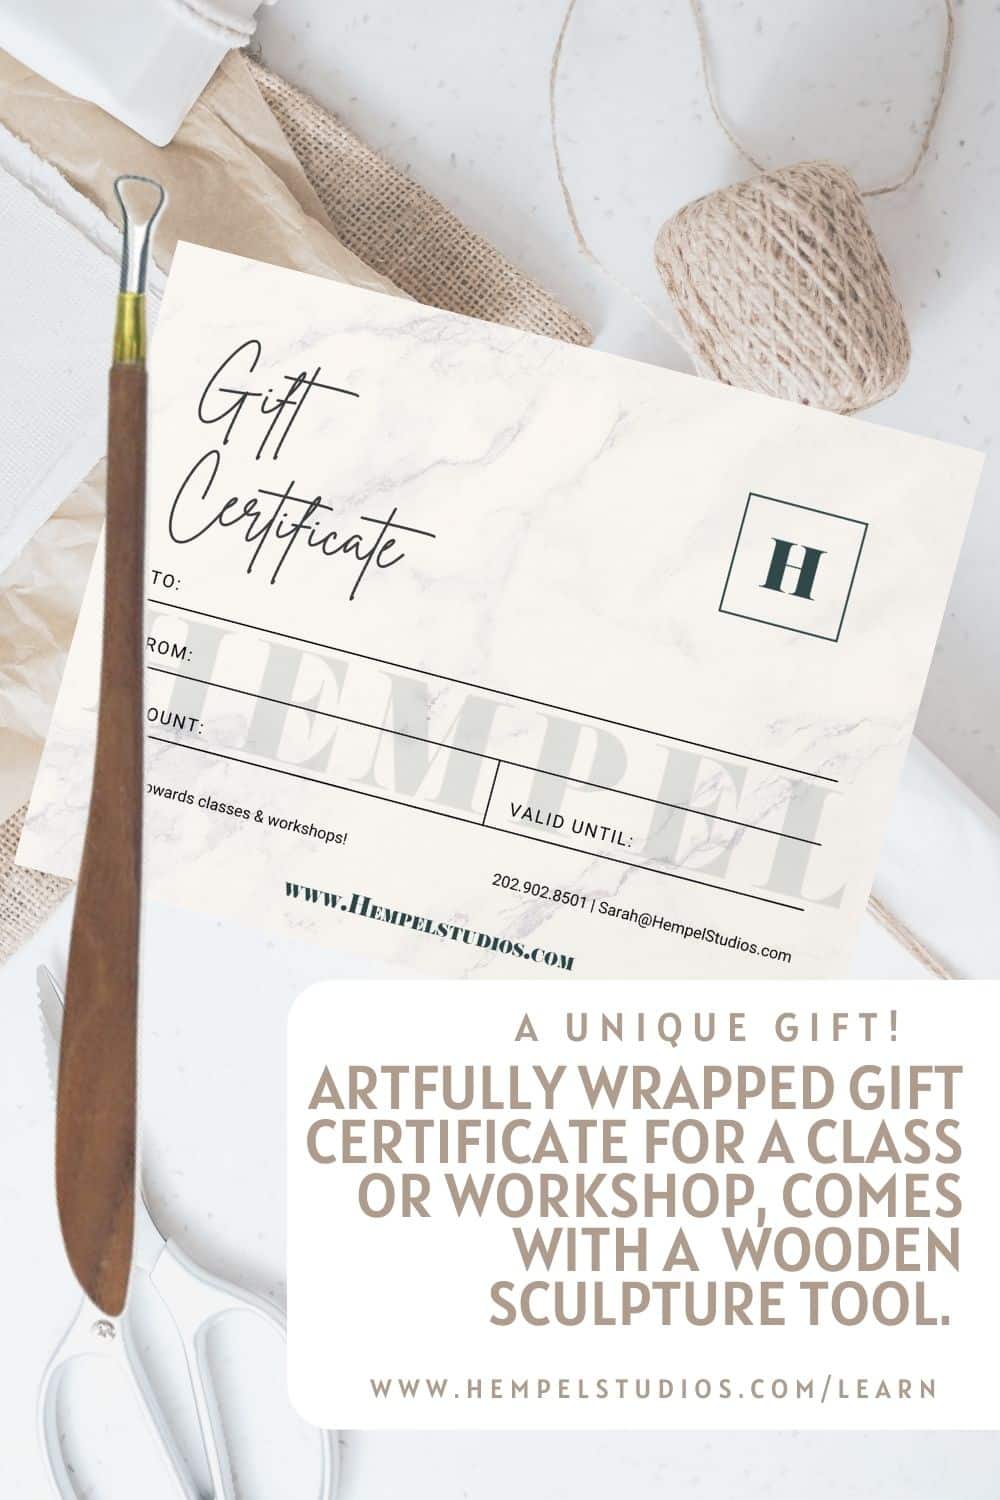 Image of a gift certificate and wooden sculpture tool. Caption reads, "A unique gift! Artfully wrapped gift certificate for a class or workshop, comes with a wooden sculpture tool."